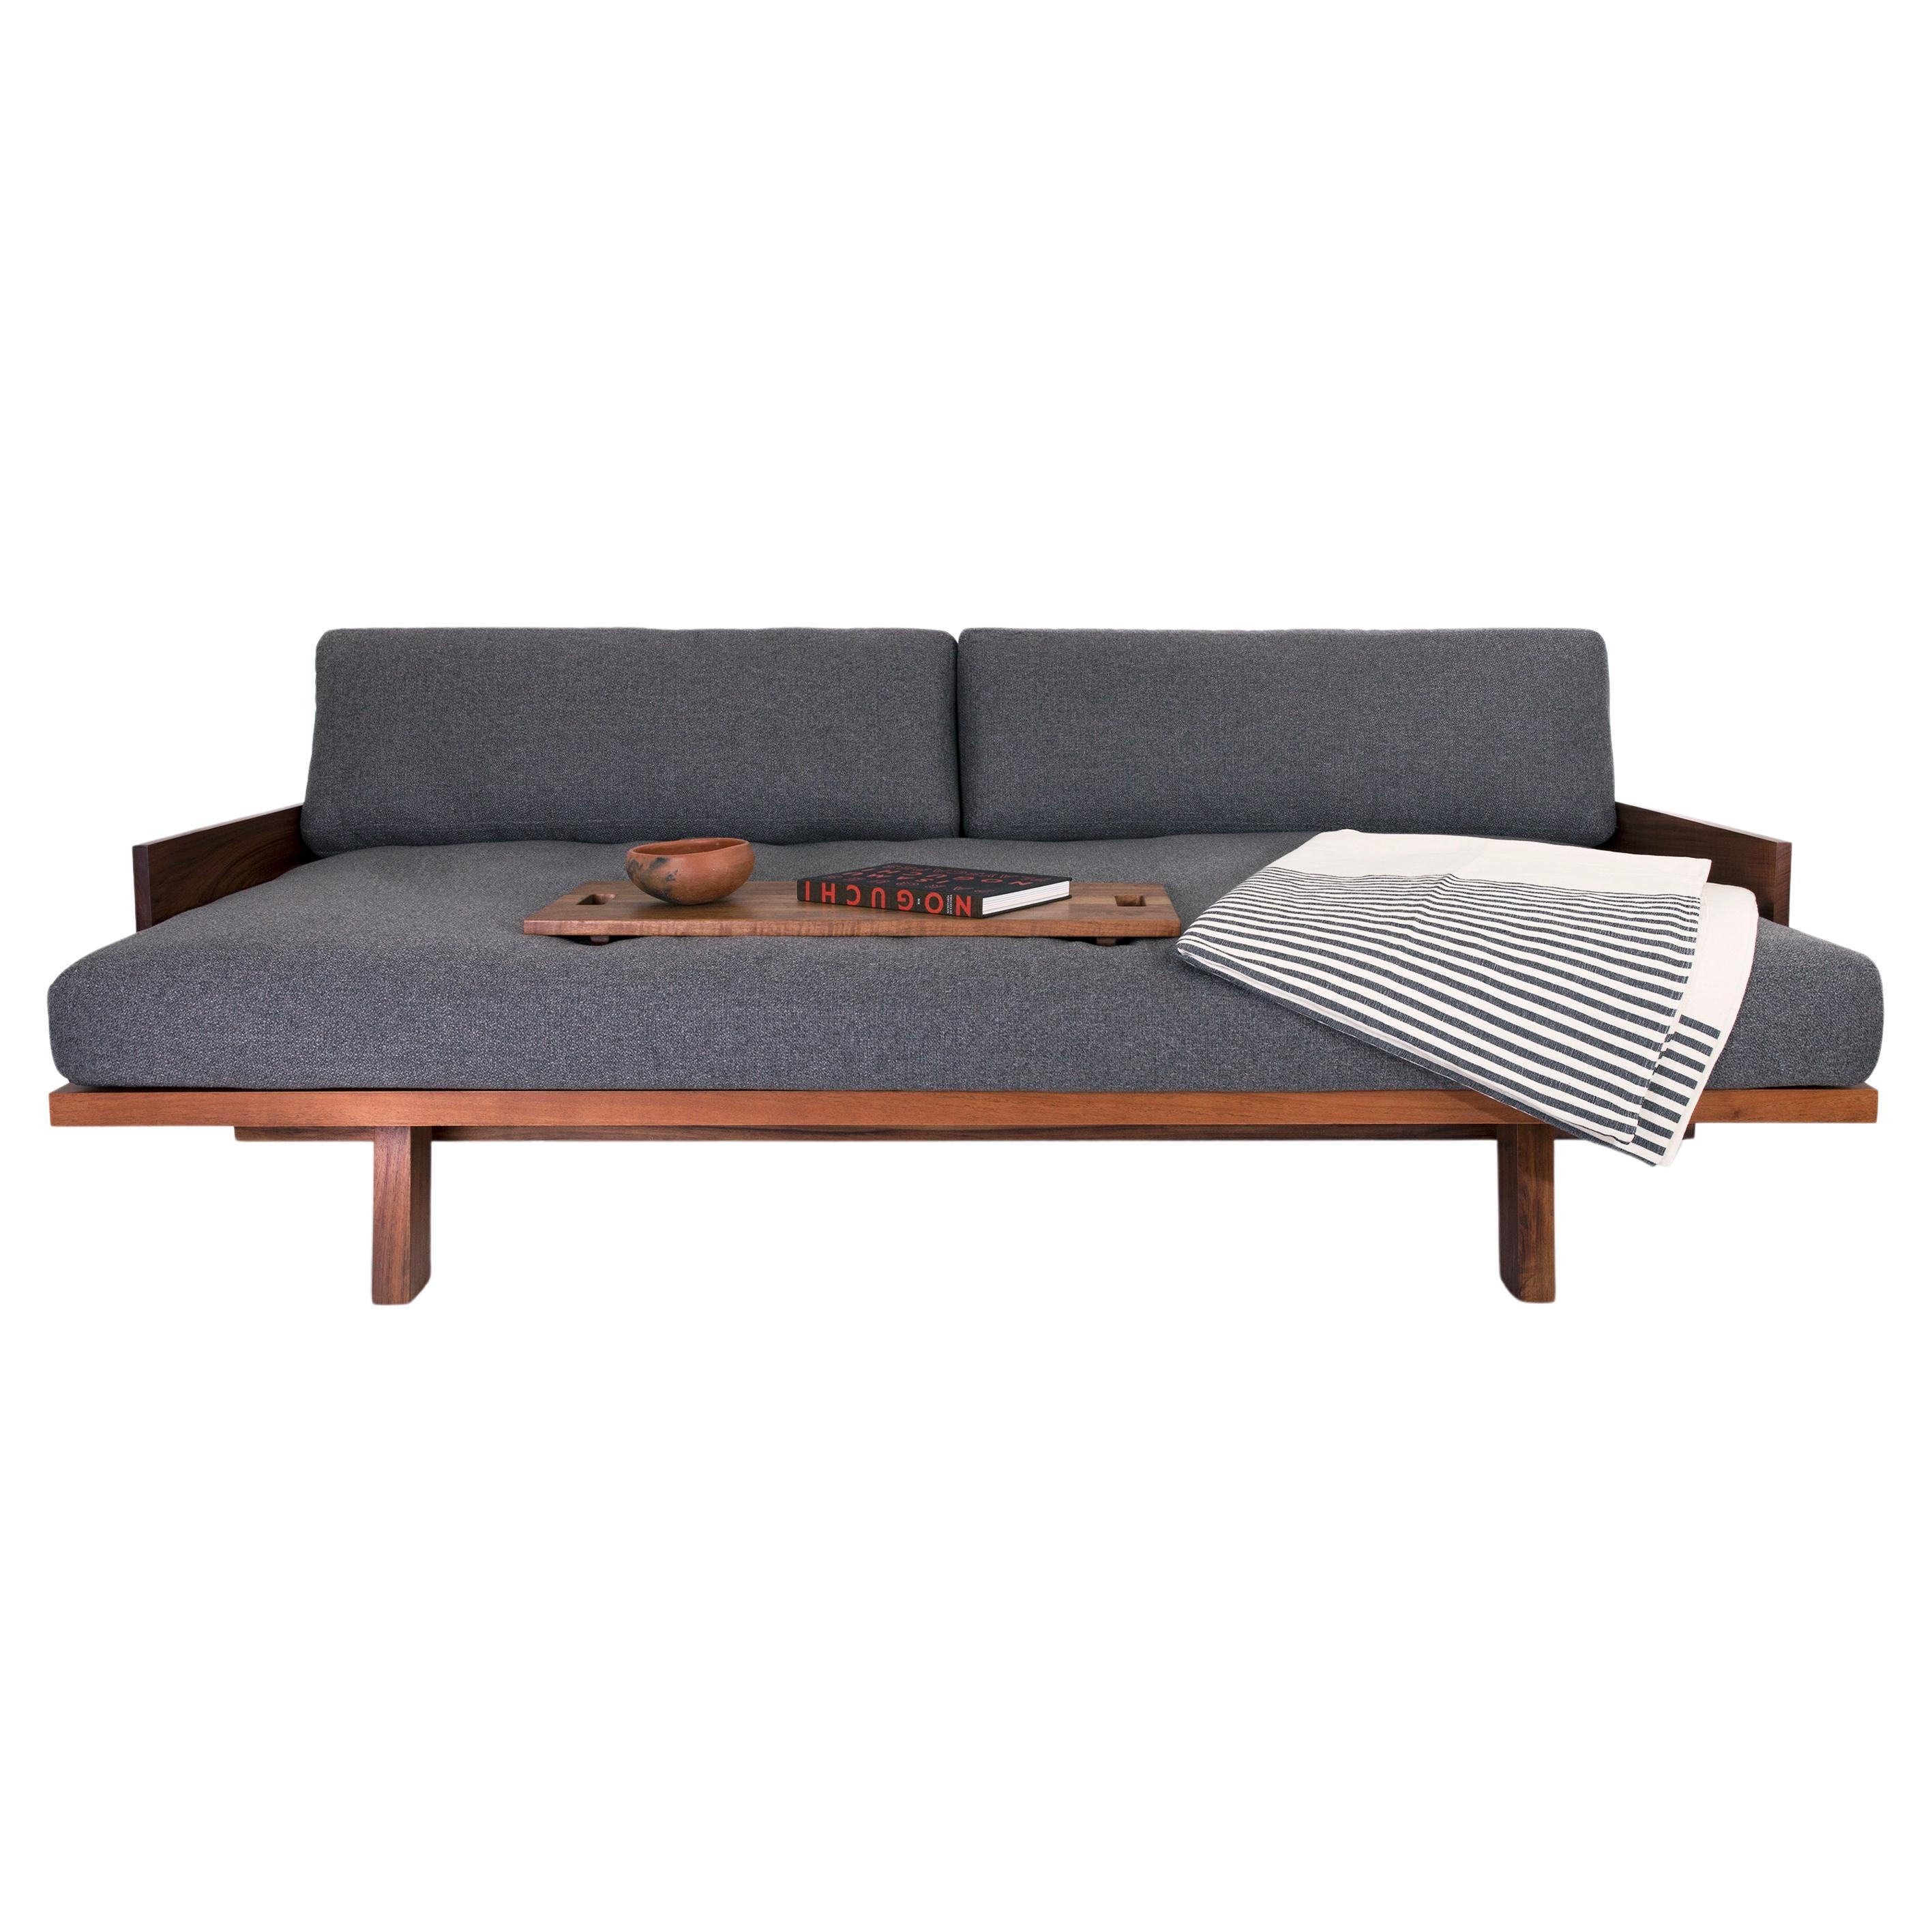 An outstanding cozy sofa/daybed specially designed to provide maximum versatility and comfort to the ritual of relaxation, thanks to its wide dimensions and its mobile cushions it can be adapted according to your needs and mood; from a sofa to a